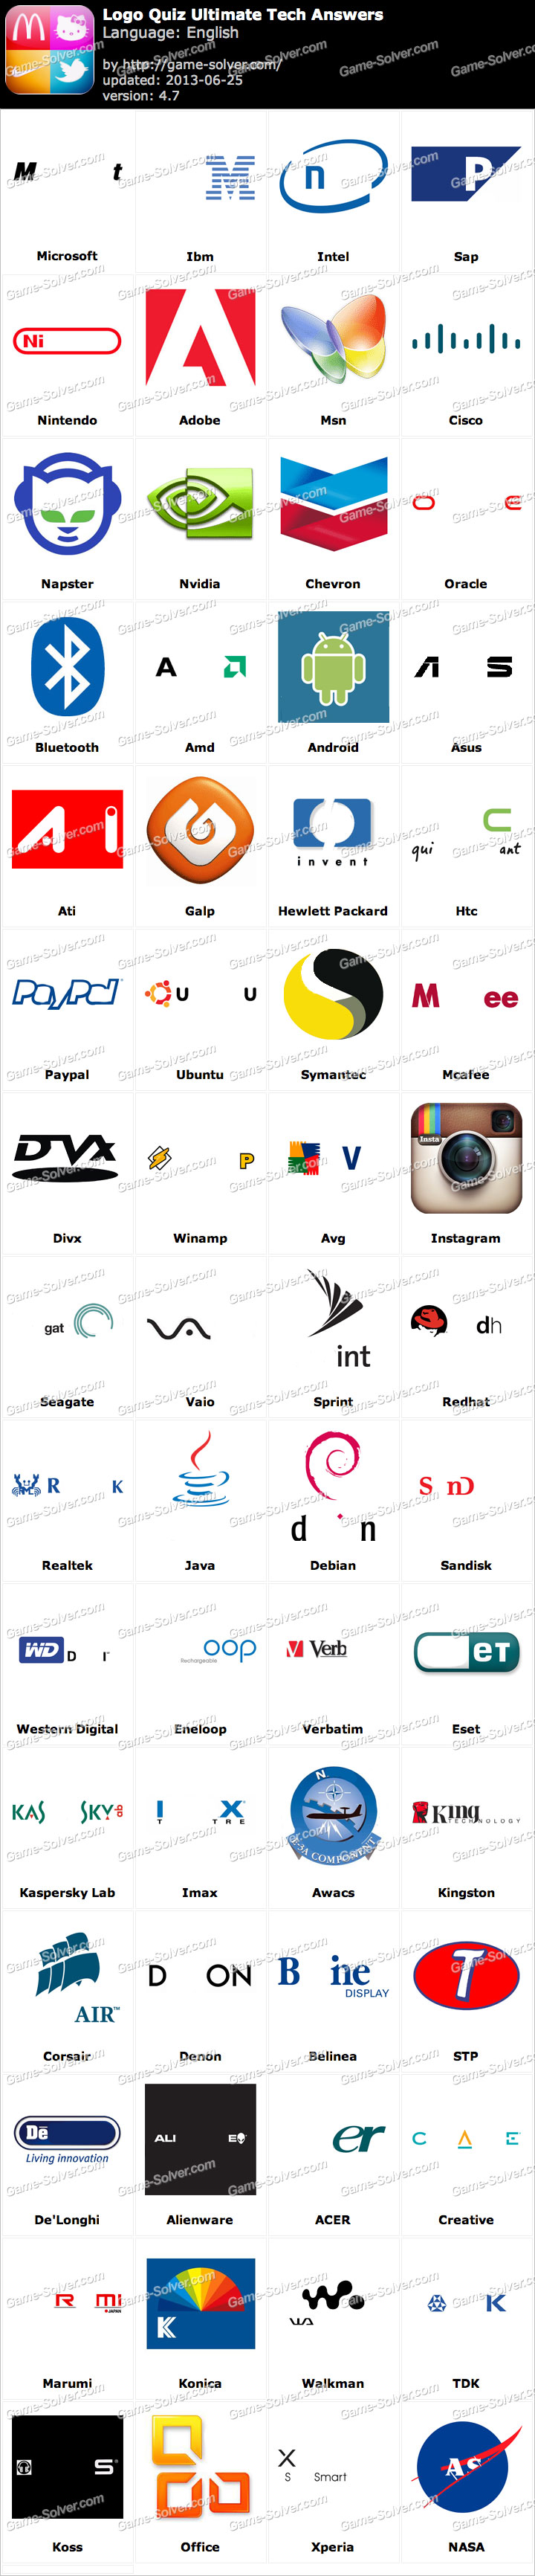 internet and technology logo quiz answers